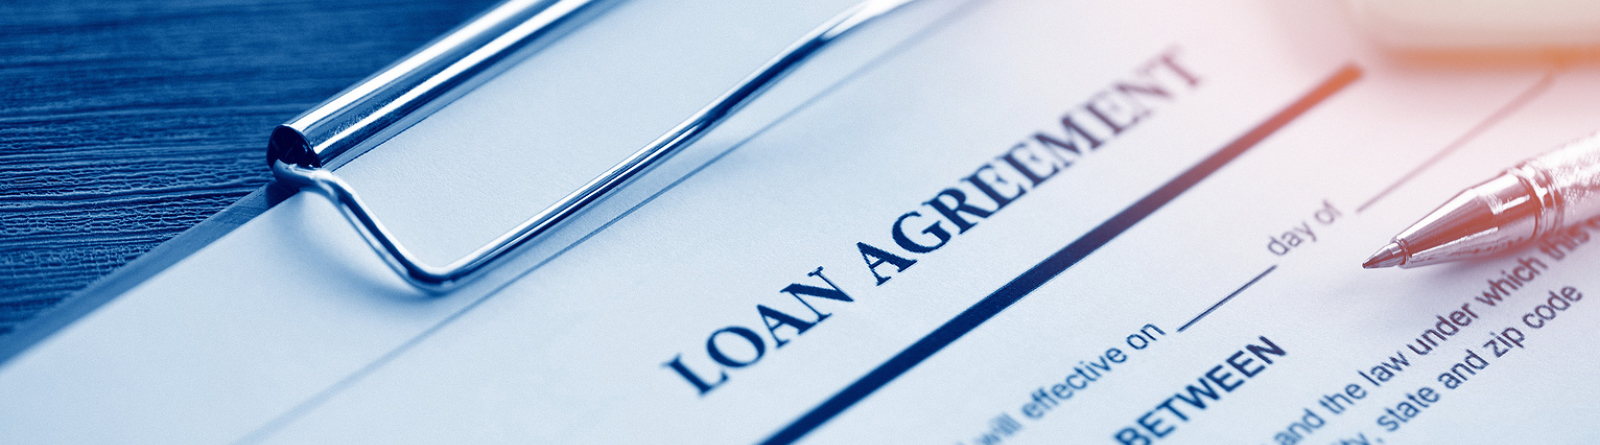 Loan agreement papers